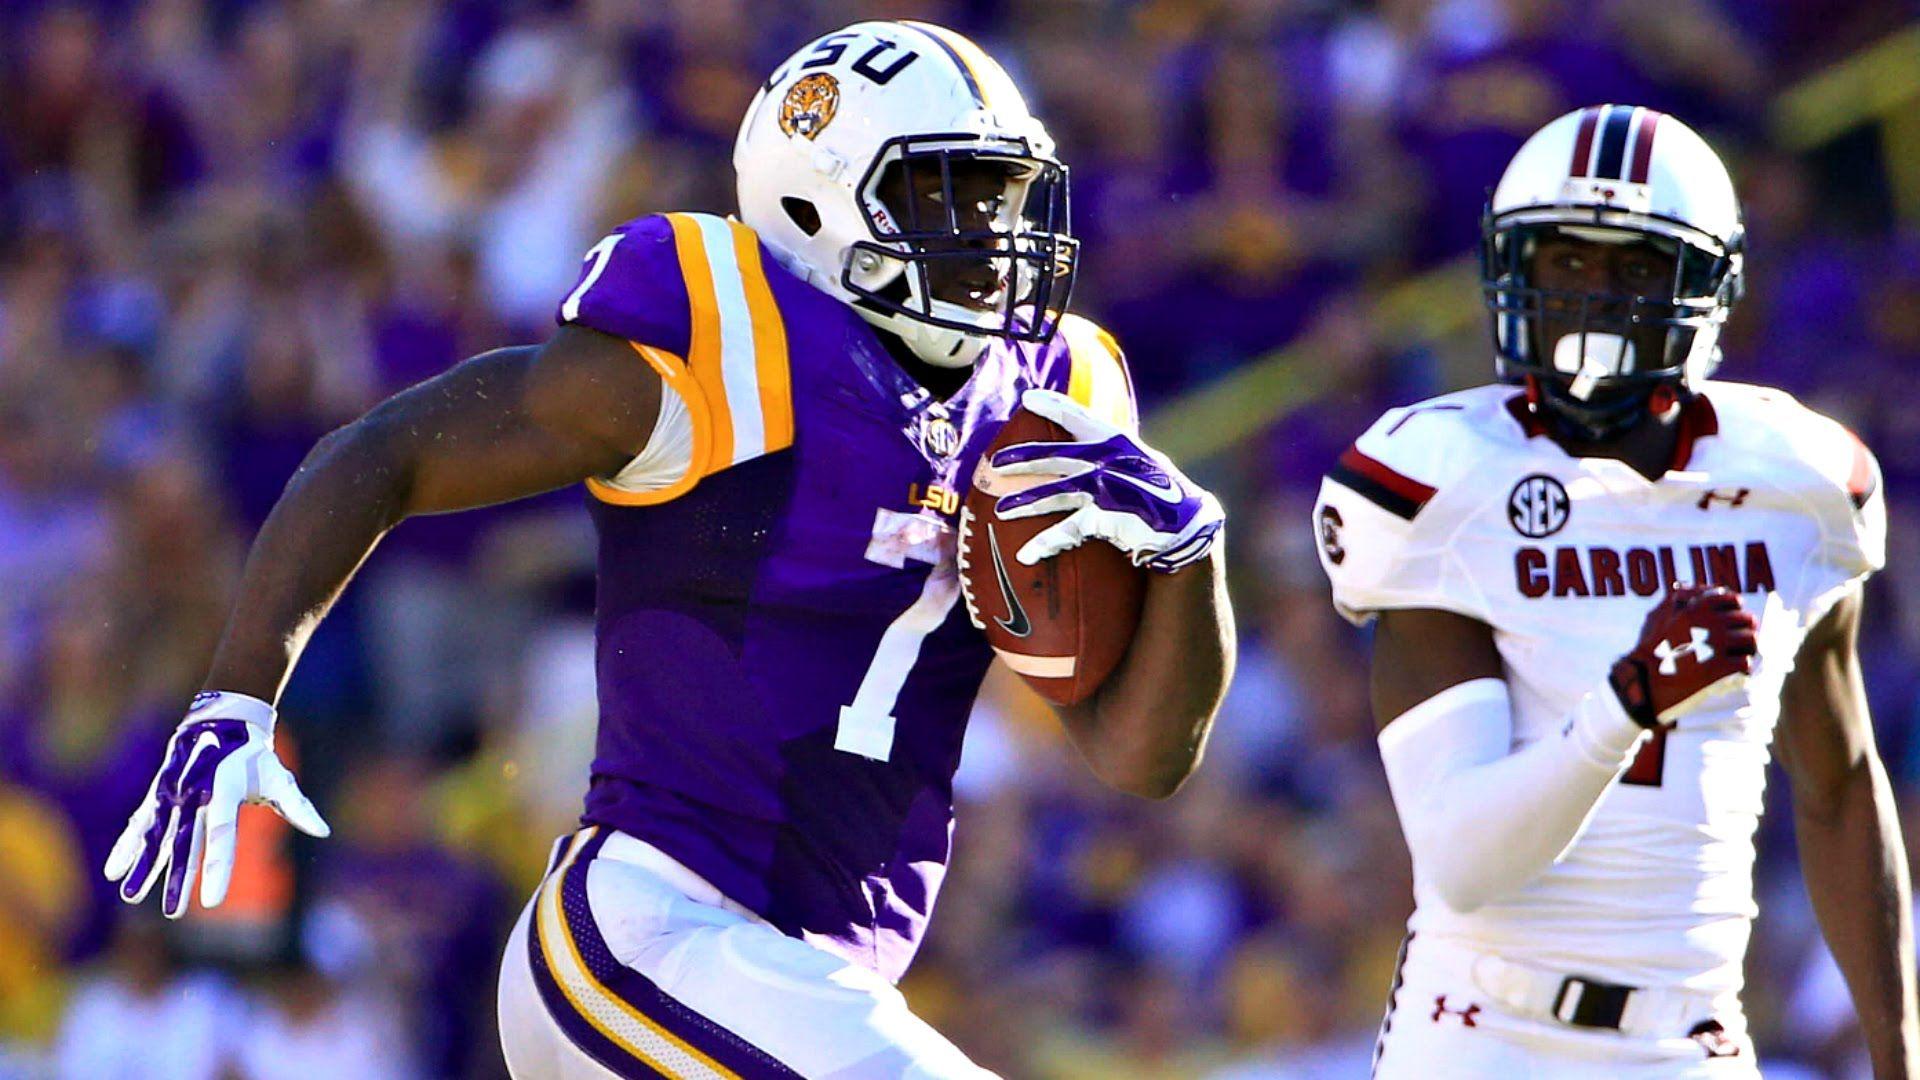 Leonard Fournette Leads LSU Over South Carolina With Another Big